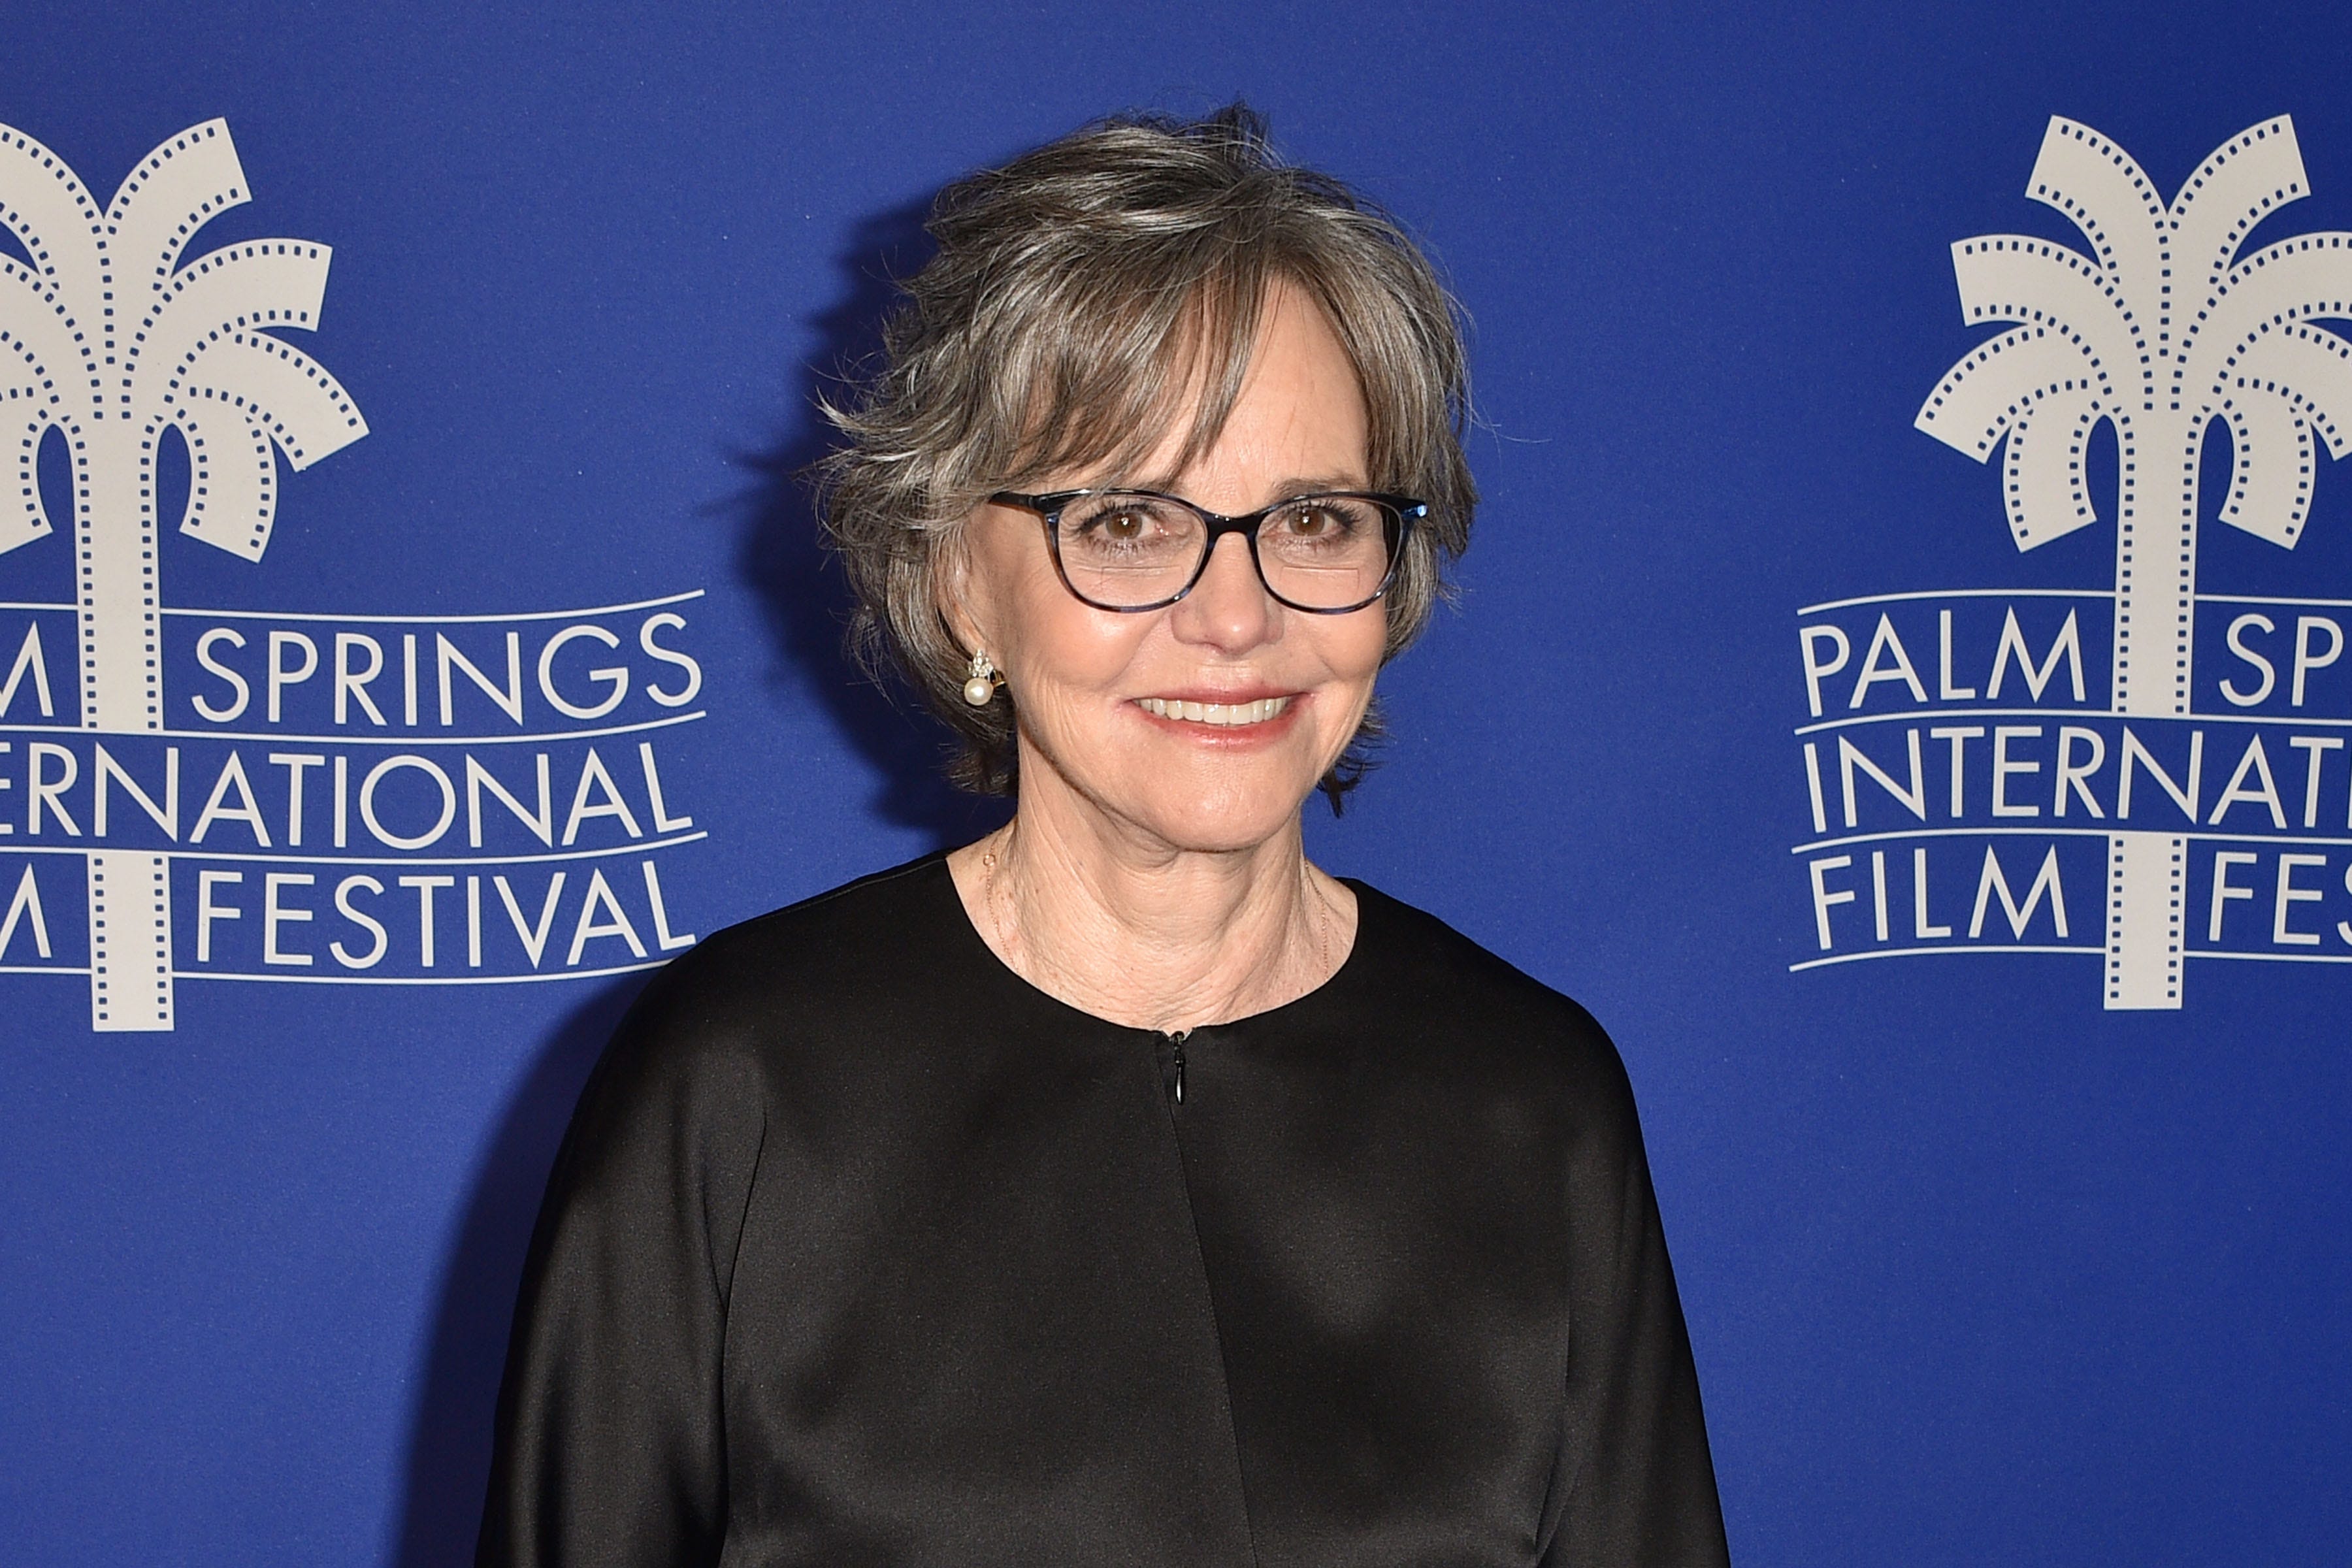 Sally Field reveals beloved movie role she turned down: ‘Wouldn’t be the same’